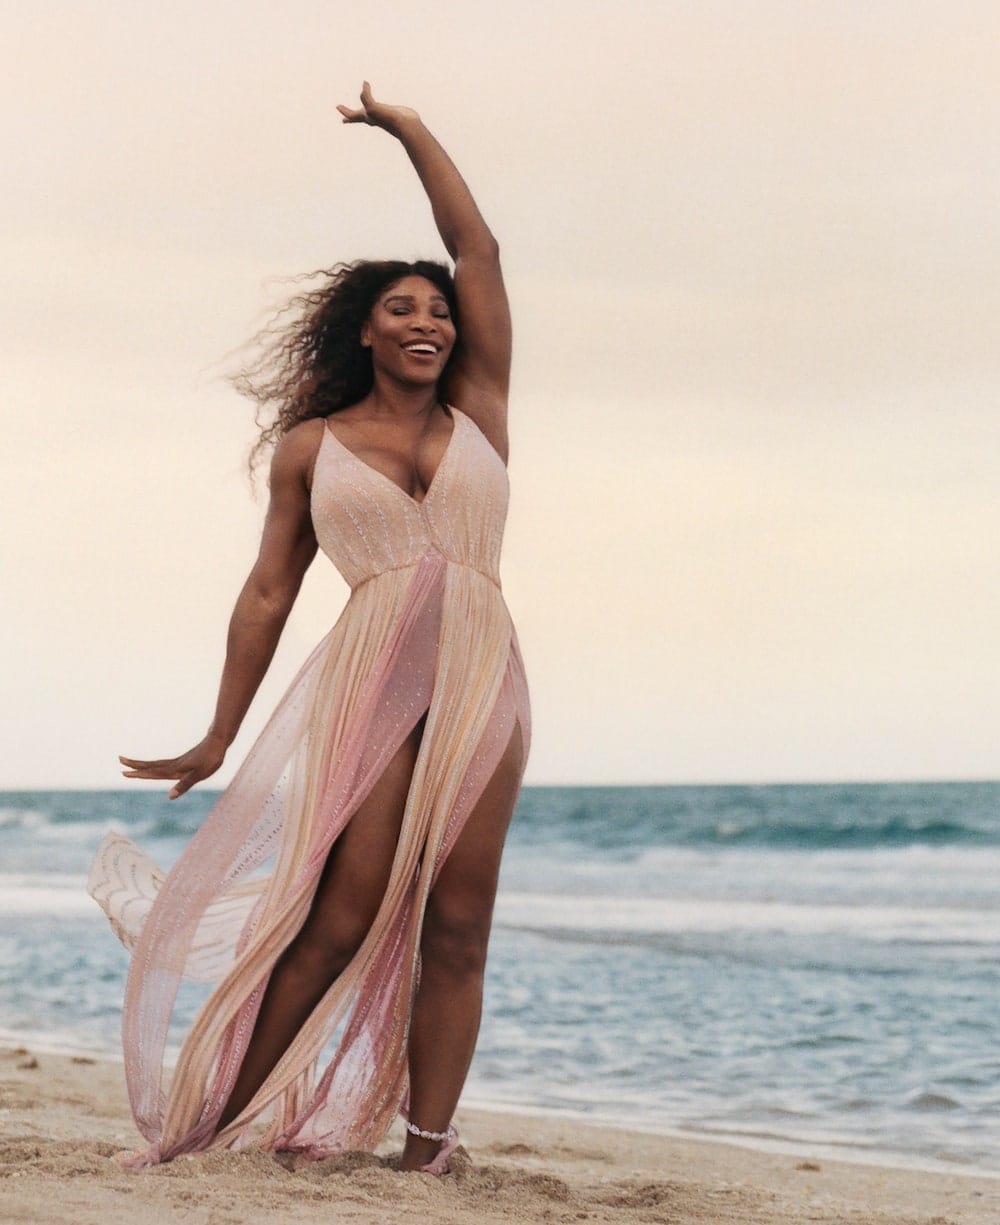 Serena Williams Retirement Cover Story on Vogue September 2022 Issue